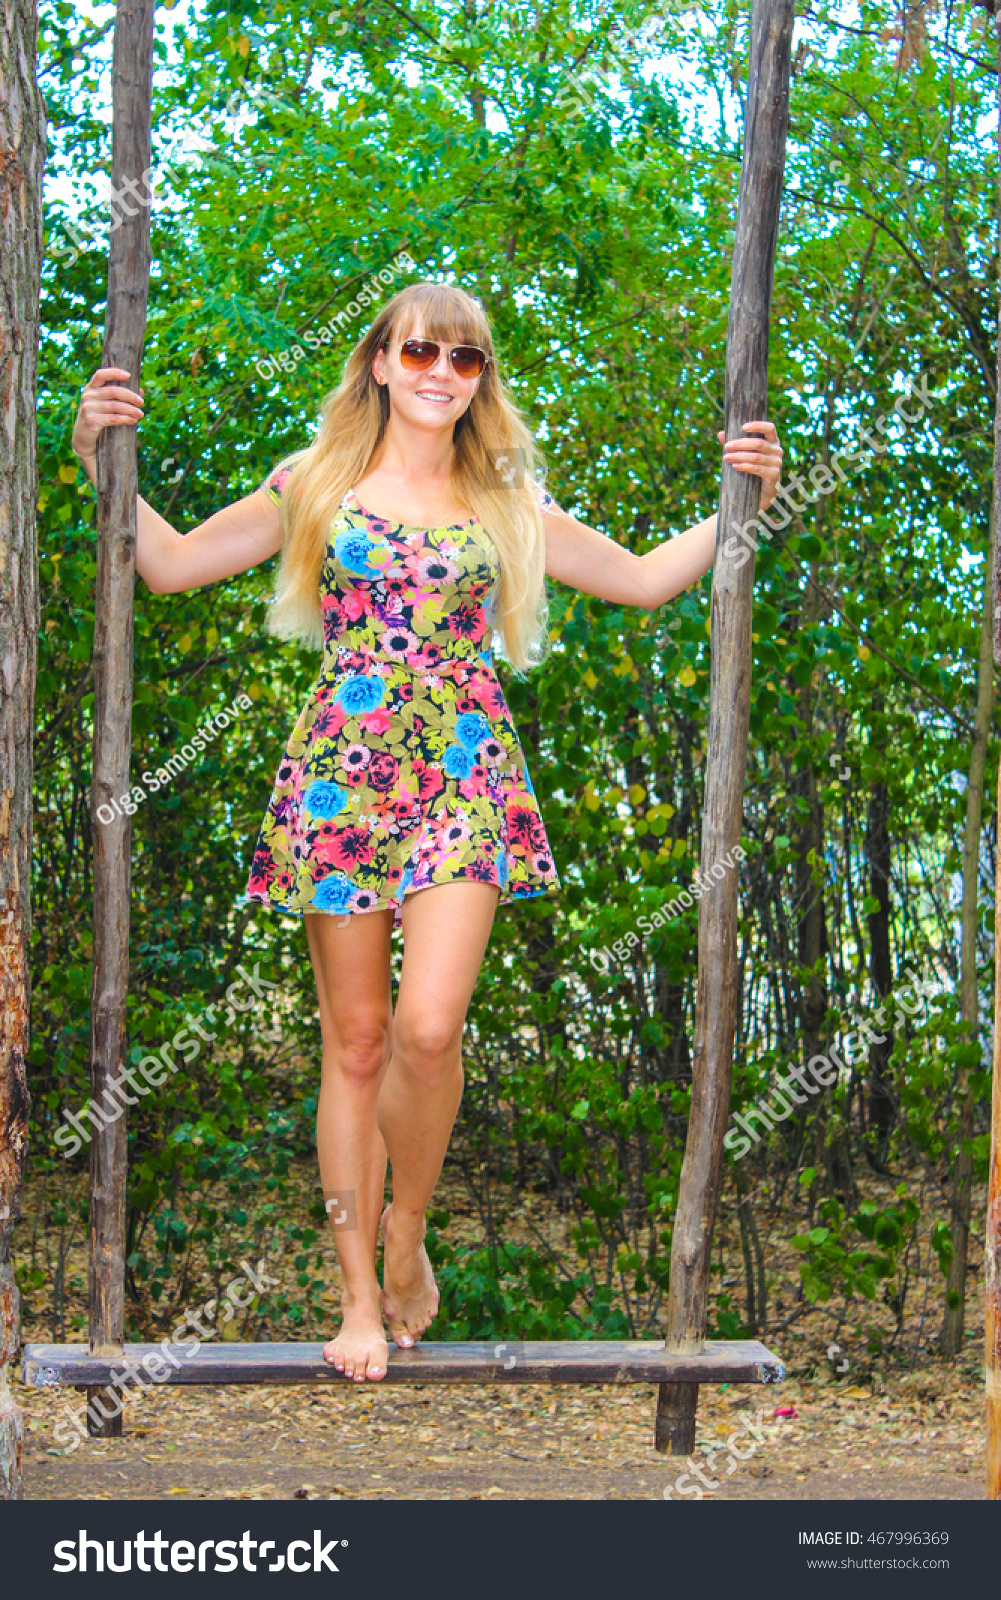 https://image.shutterstock.com/shutterstock/photos/467996369/display_1500/stock-photo-young-beautiful-woman-swinging-on-natural-background-467996369.jpg